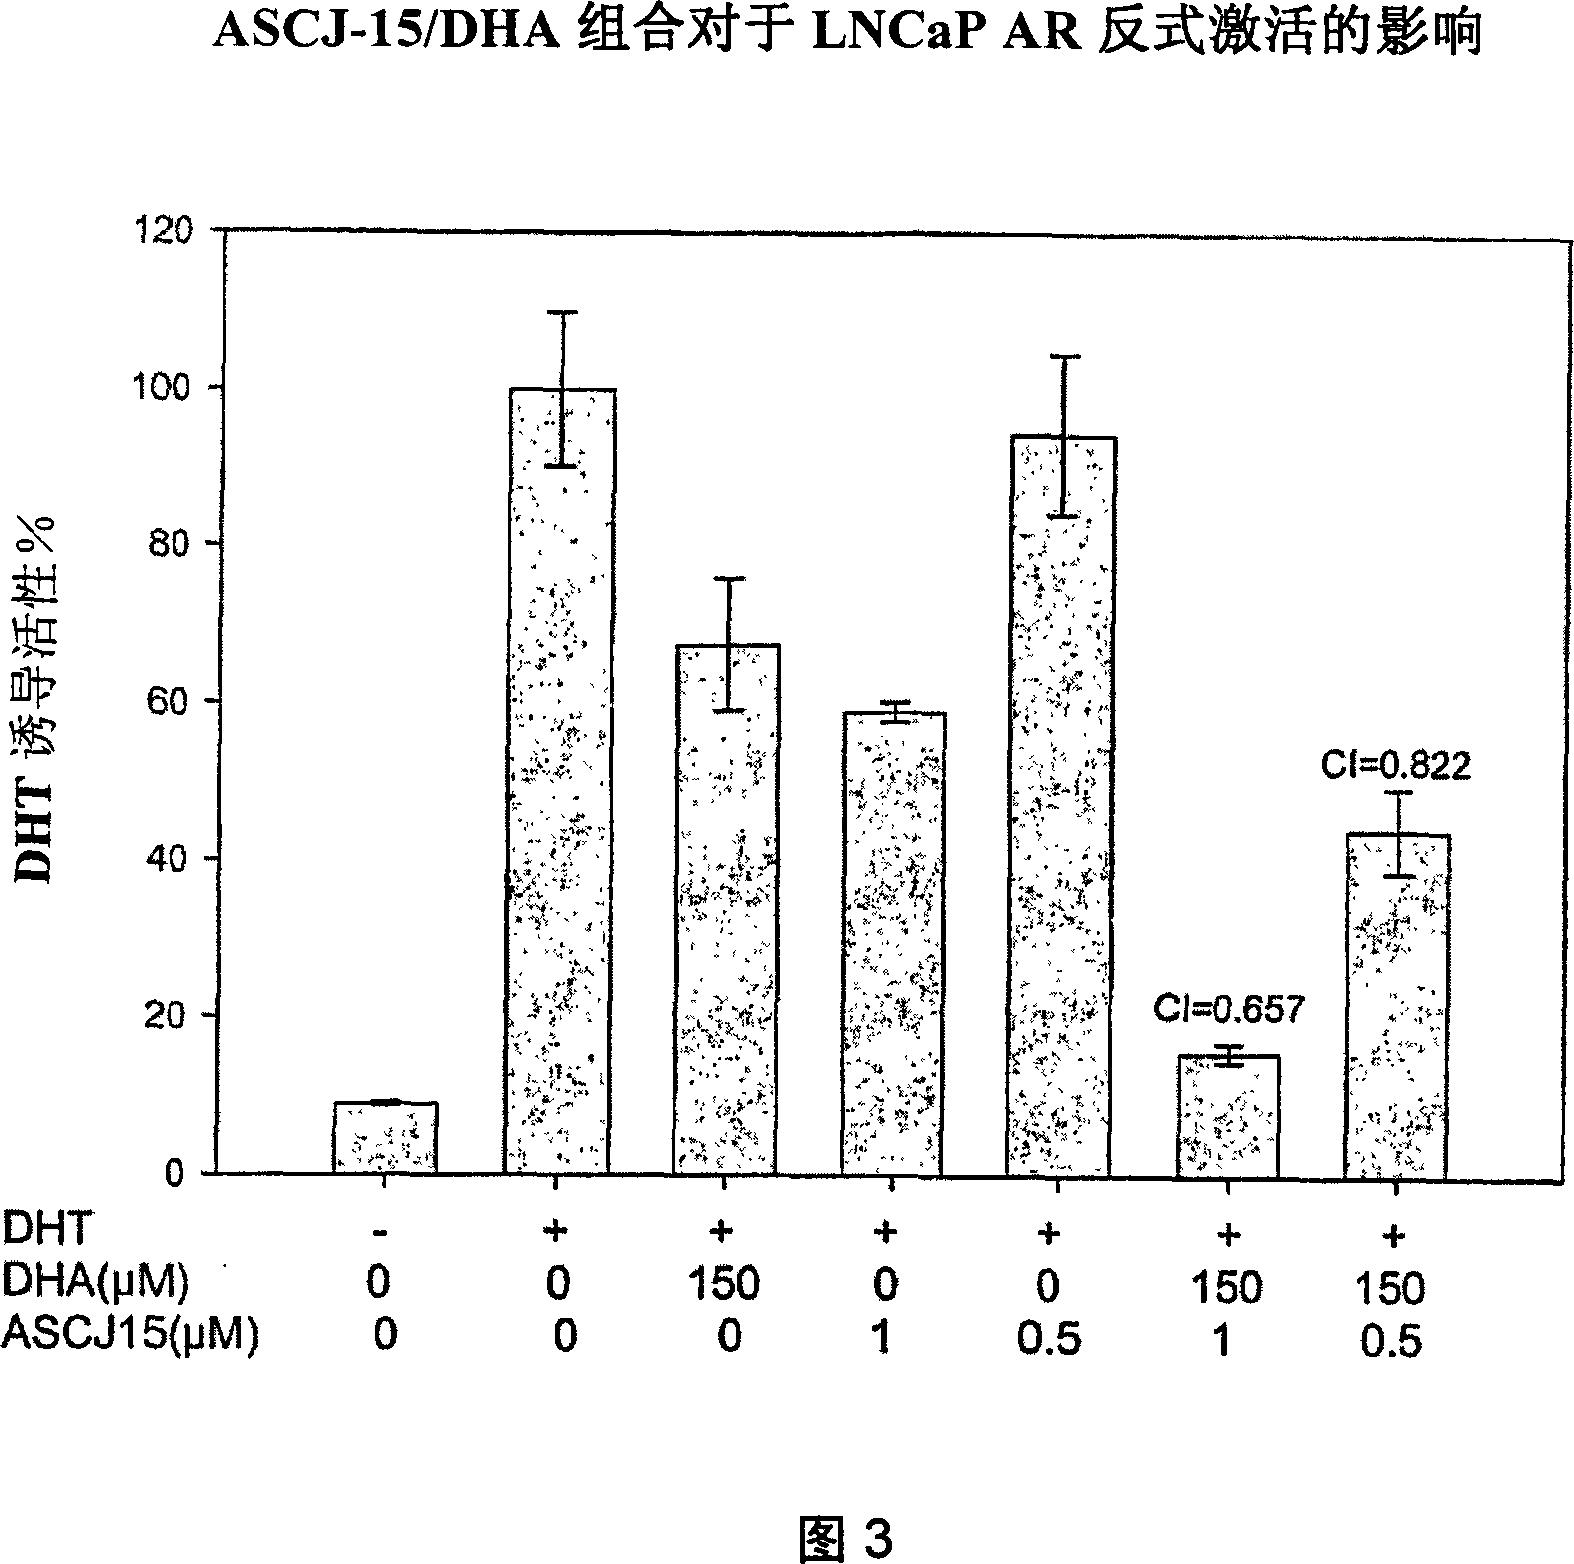 Enhancement of anti-androgenic activity by a combination of inhibitors targeting different steps of a steroid-dependent gene activation pathway and uses thereof